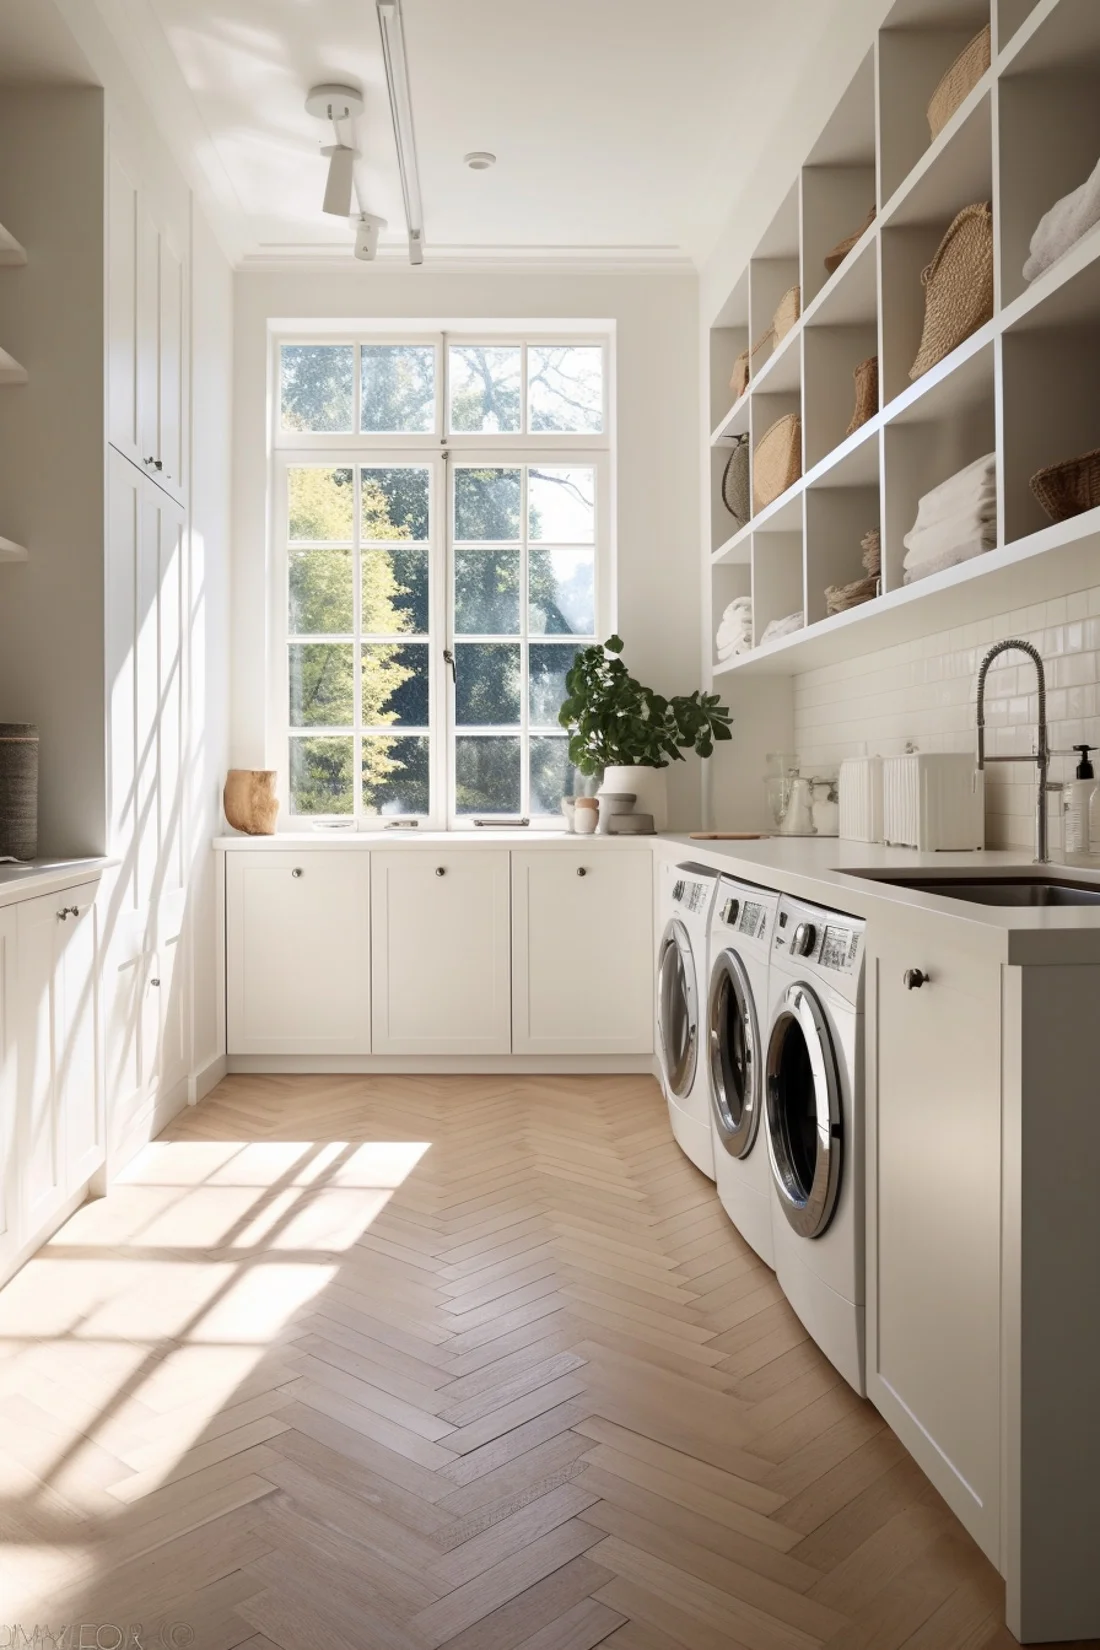 white laundry room with herringbone wood floors, double washer and dryer with open shelving ideas full of baskets and towels, with window